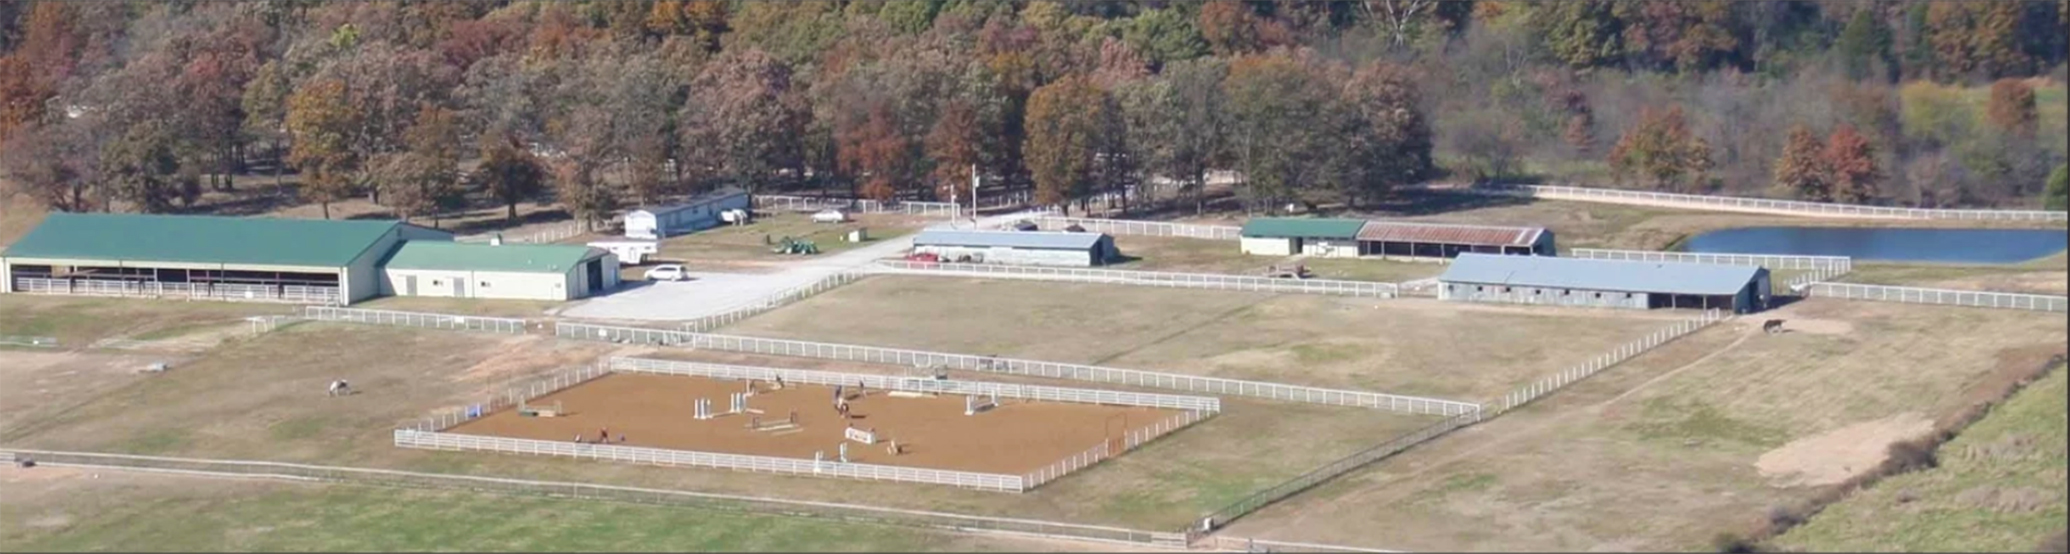 NWA Stables Facility